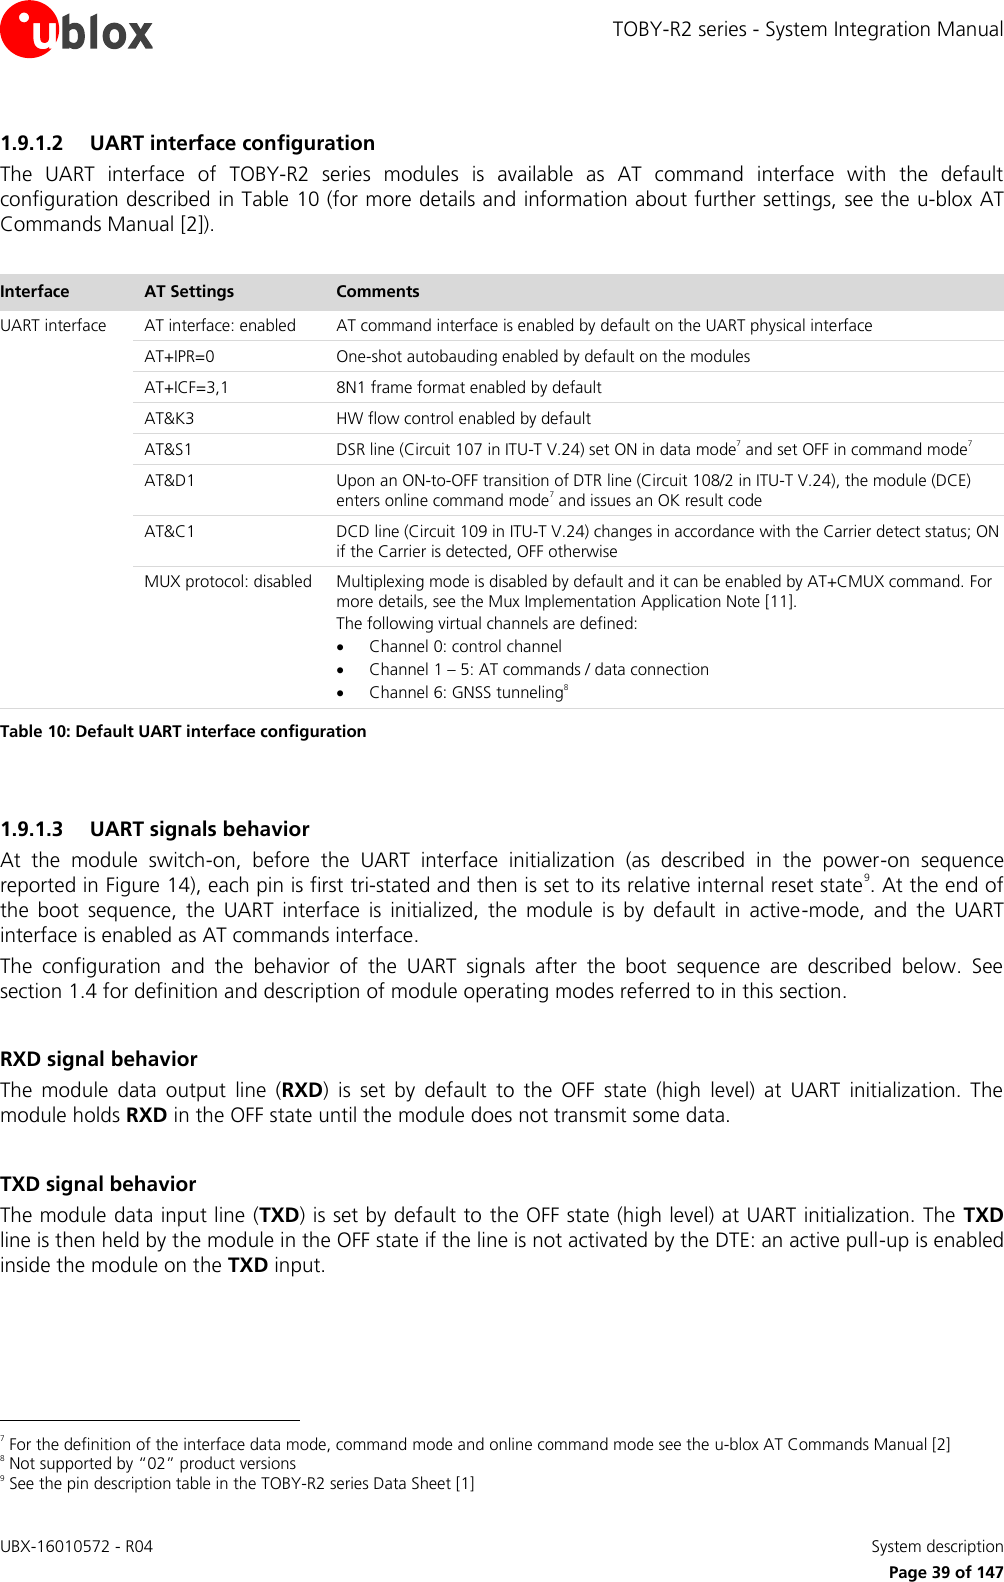 TOBY-R2 series - System Integration Manual UBX-16010572 - R04    System description     Page 39 of 147 1.9.1.2 UART interface configuration The  UART  interface  of  TOBY-R2  series  modules  is  available  as  AT  command  interface  with  the  default configuration described in Table 10 (for more details and information about further settings, see the u-blox AT Commands Manual [2]).  Interface AT Settings Comments UART interface AT interface: enabled AT command interface is enabled by default on the UART physical interface  AT+IPR=0 One-shot autobauding enabled by default on the modules  AT+ICF=3,1 8N1 frame format enabled by default  AT&amp;K3 HW flow control enabled by default  AT&amp;S1 DSR line (Circuit 107 in ITU-T V.24) set ON in data mode7 and set OFF in command mode7  AT&amp;D1 Upon an ON-to-OFF transition of DTR line (Circuit 108/2 in ITU-T V.24), the module (DCE) enters online command mode7 and issues an OK result code  AT&amp;C1 DCD line (Circuit 109 in ITU-T V.24) changes in accordance with the Carrier detect status; ON if the Carrier is detected, OFF otherwise  MUX protocol: disabled Multiplexing mode is disabled by default and it can be enabled by AT+CMUX command. For more details, see the Mux Implementation Application Note [11]. The following virtual channels are defined:  Channel 0: control channel  Channel 1 – 5: AT commands / data connection  Channel 6: GNSS tunneling8 Table 10: Default UART interface configuration  1.9.1.3 UART signals behavior At  the  module  switch-on,  before  the  UART  interface  initialization  (as  described  in  the  power-on  sequence reported in Figure 14), each pin is first tri-stated and then is set to its relative internal reset state9. At the end of the  boot  sequence,  the  UART  interface  is  initialized,  the  module  is  by  default  in  active-mode,  and  the  UART interface is enabled as AT commands interface. The  configuration  and  the  behavior  of  the  UART  signals  after  the  boot  sequence  are  described  below.  See section 1.4 for definition and description of module operating modes referred to in this section.  RXD signal behavior The  module  data  output  line  (RXD)  is  set  by  default  to  the  OFF  state  (high  level)  at  UART  initialization.  The module holds RXD in the OFF state until the module does not transmit some data.  TXD signal behavior The module data input line (TXD) is set by default to the OFF state (high level) at UART initialization. The  TXD line is then held by the module in the OFF state if the line is not activated by the DTE: an active pull-up is enabled inside the module on the TXD input.                                                        7 For the definition of the interface data mode, command mode and online command mode see the u-blox AT Commands Manual [2] 8 Not supported by “02” product versions 9 See the pin description table in the TOBY-R2 series Data Sheet [1] 